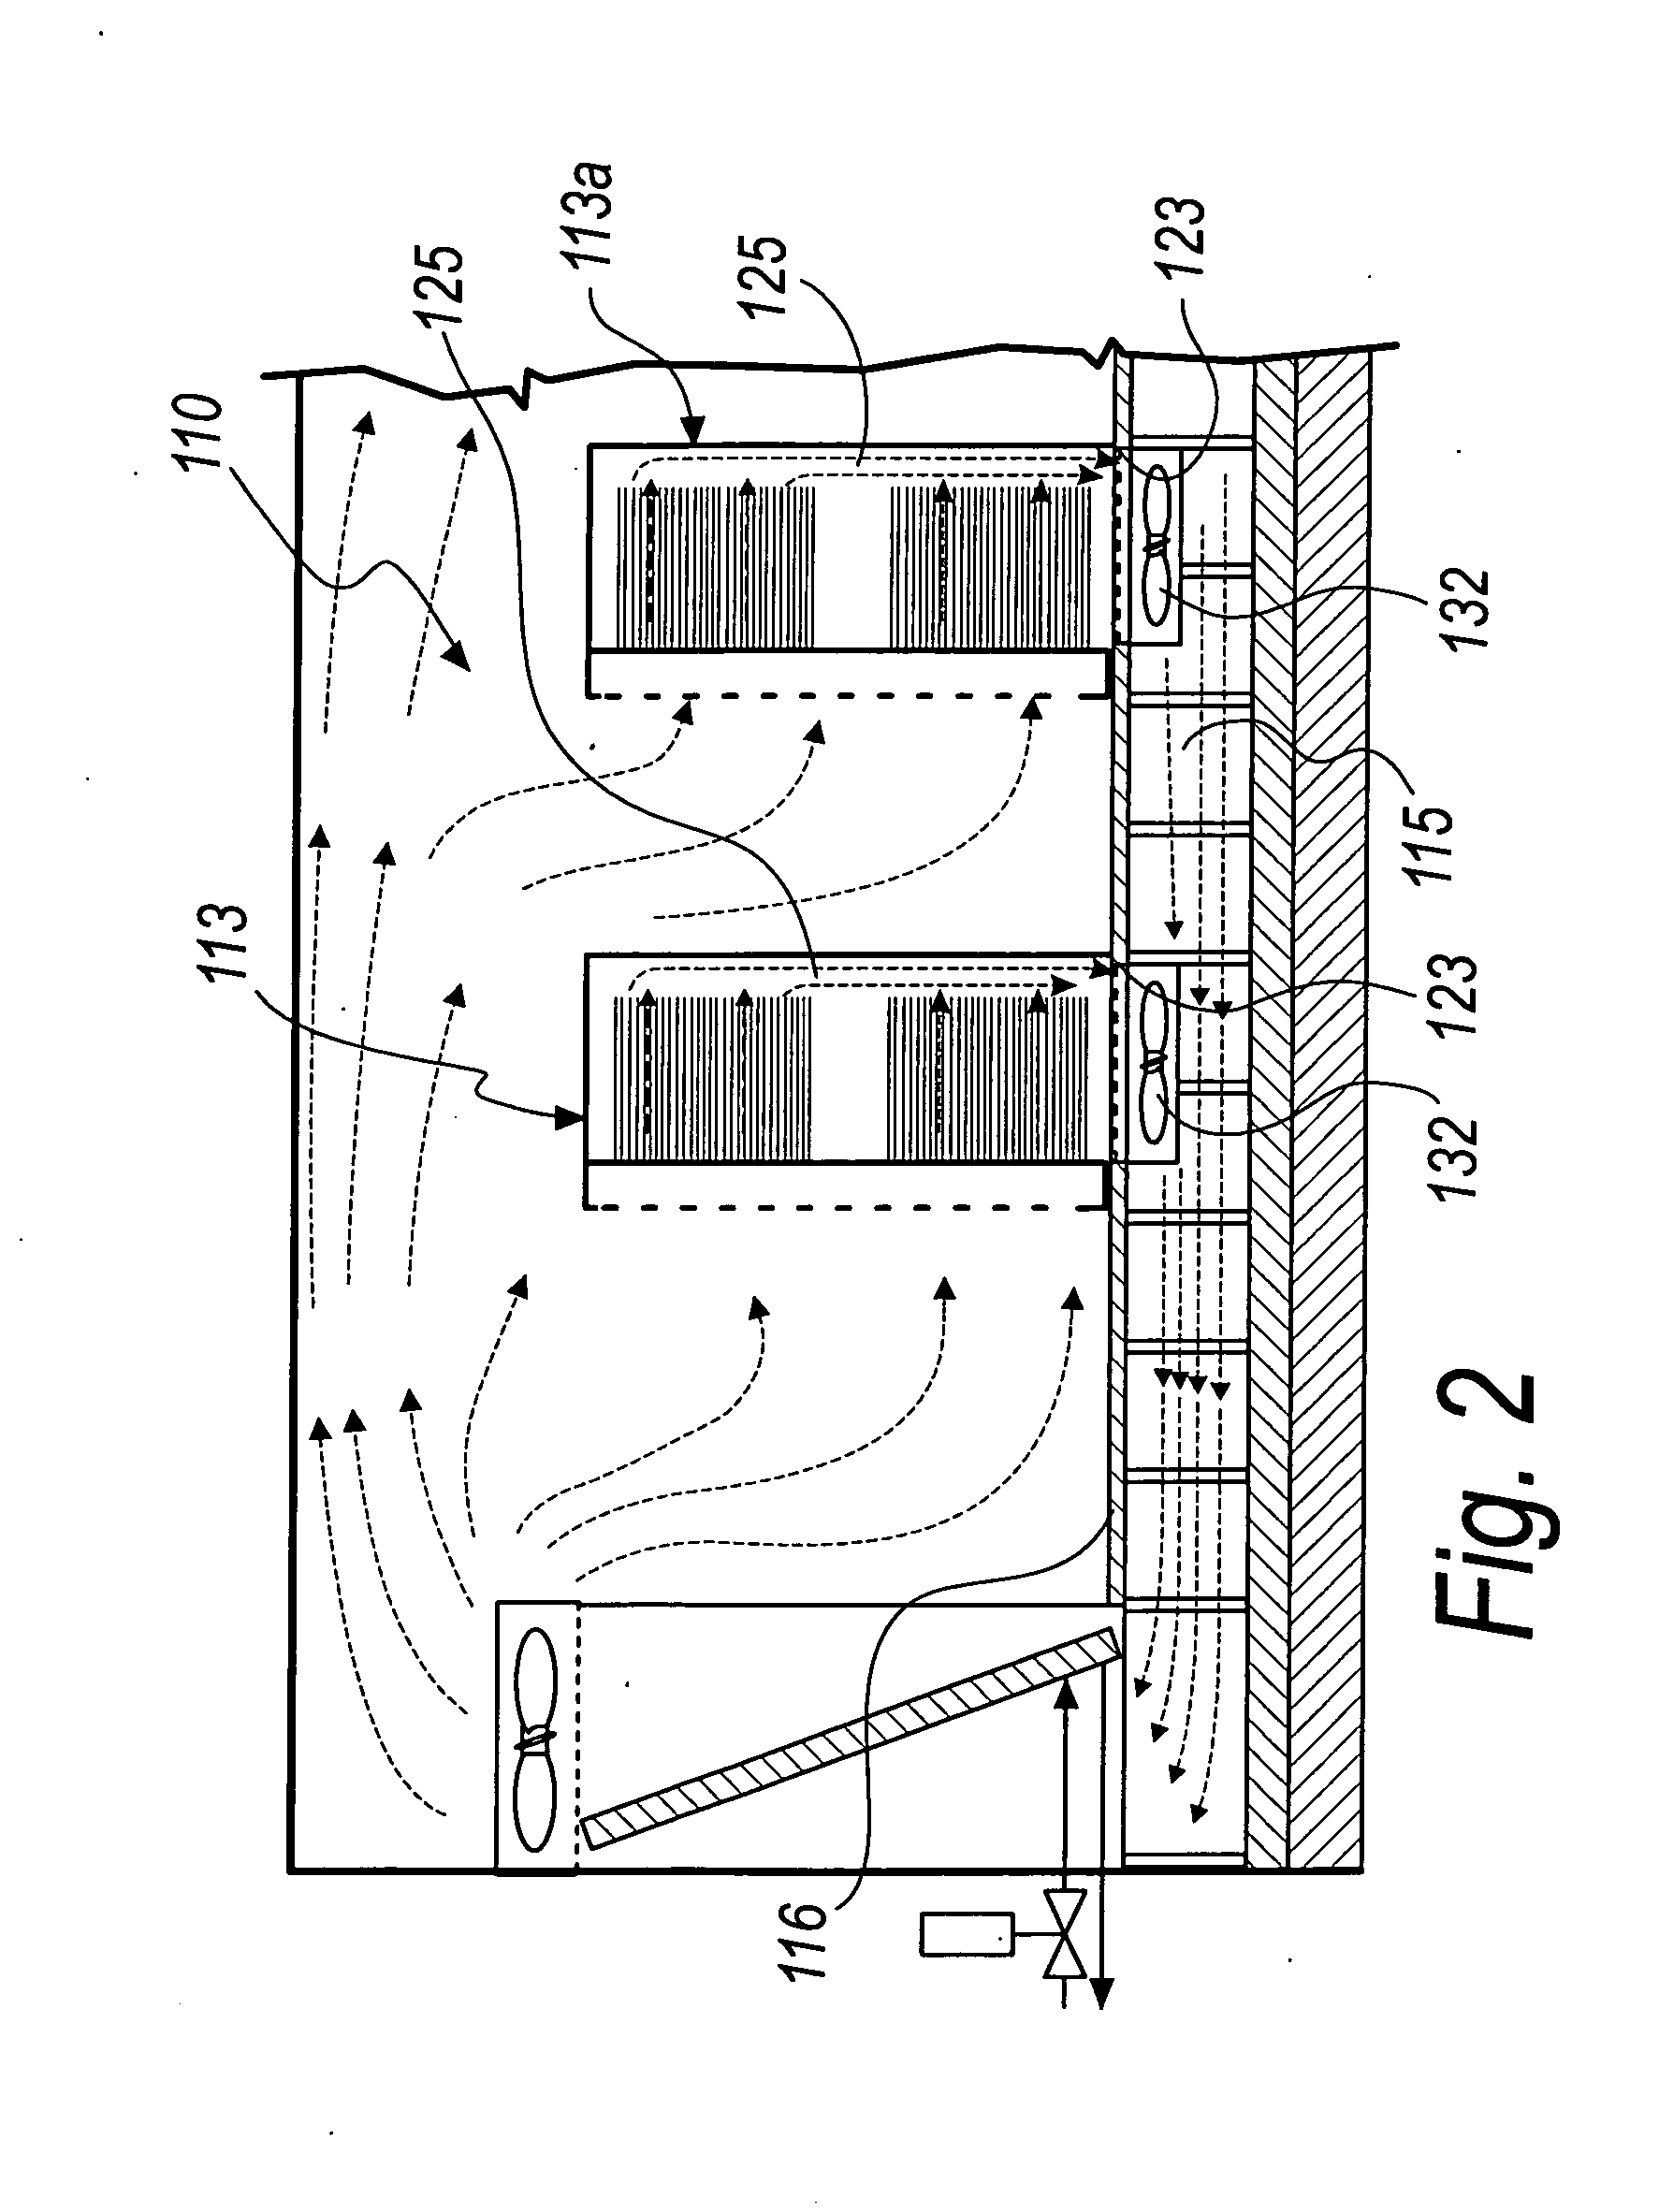 Device for cooling and conditioning an environment containing a plurality of heat emitting bodies, particularly for server rooms and the like